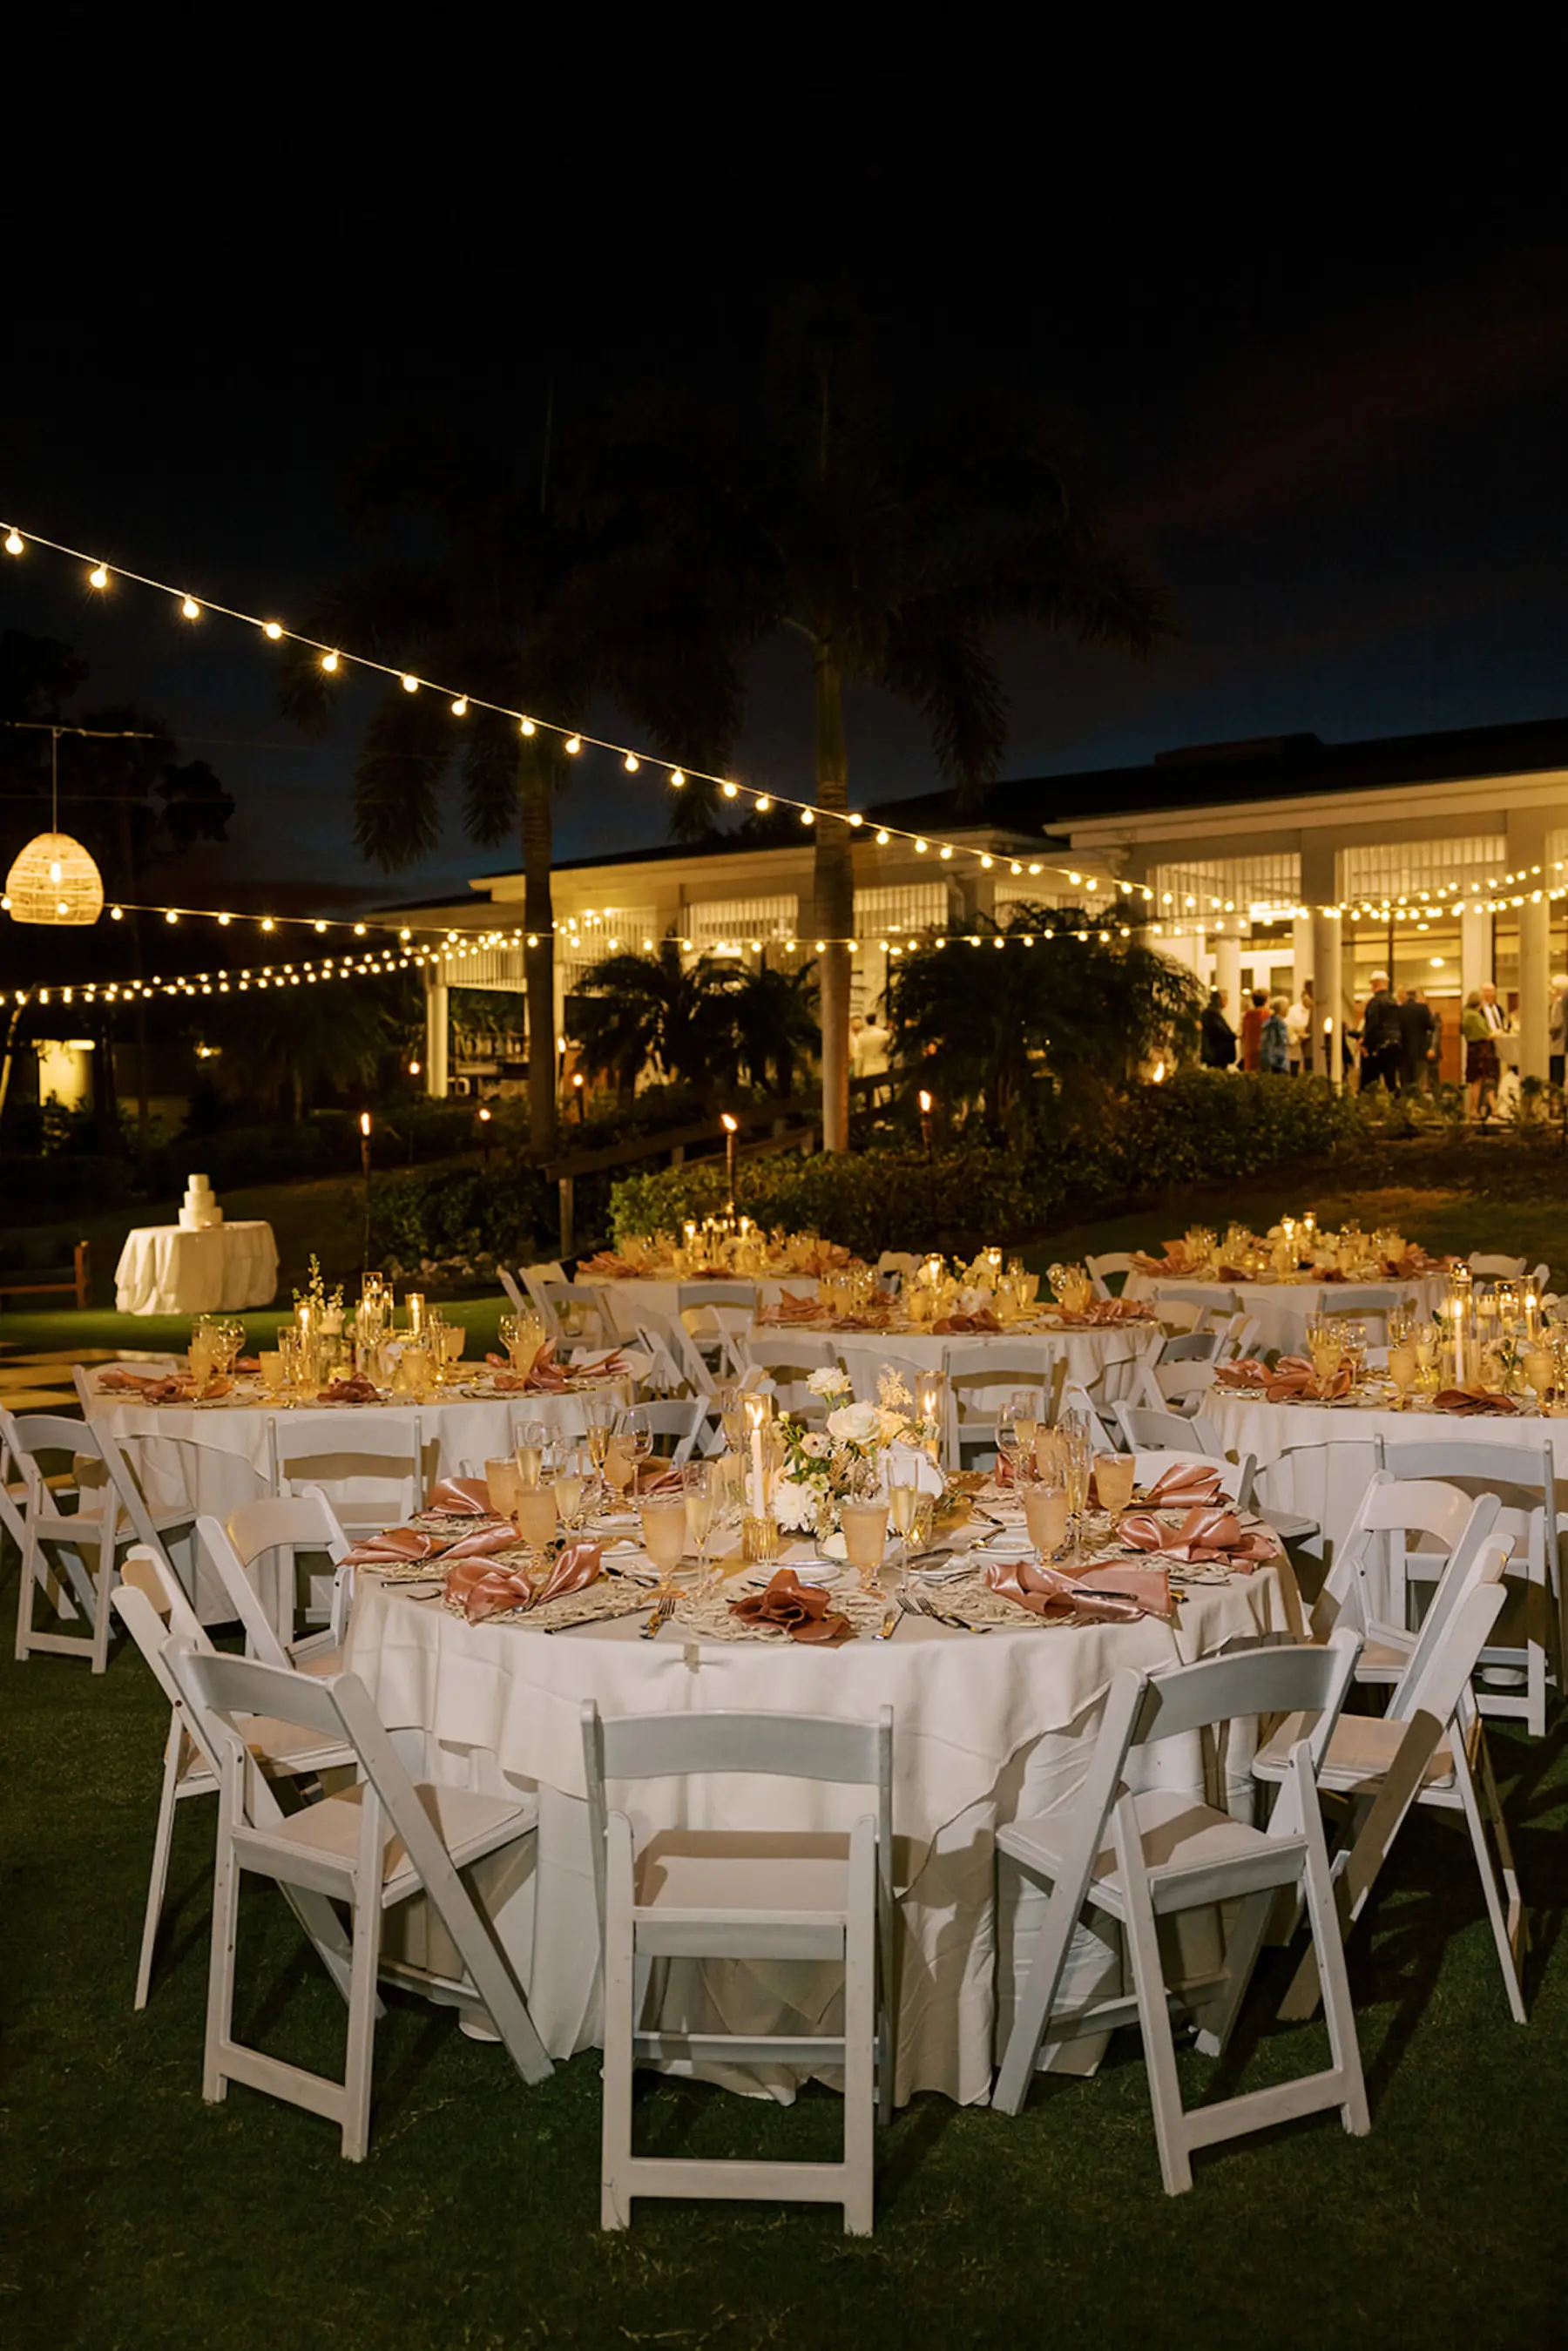 Outdoor White and Pink Wedding Reception Inspiration | Sarasota Event Venue The Resort at Longboat Key Club